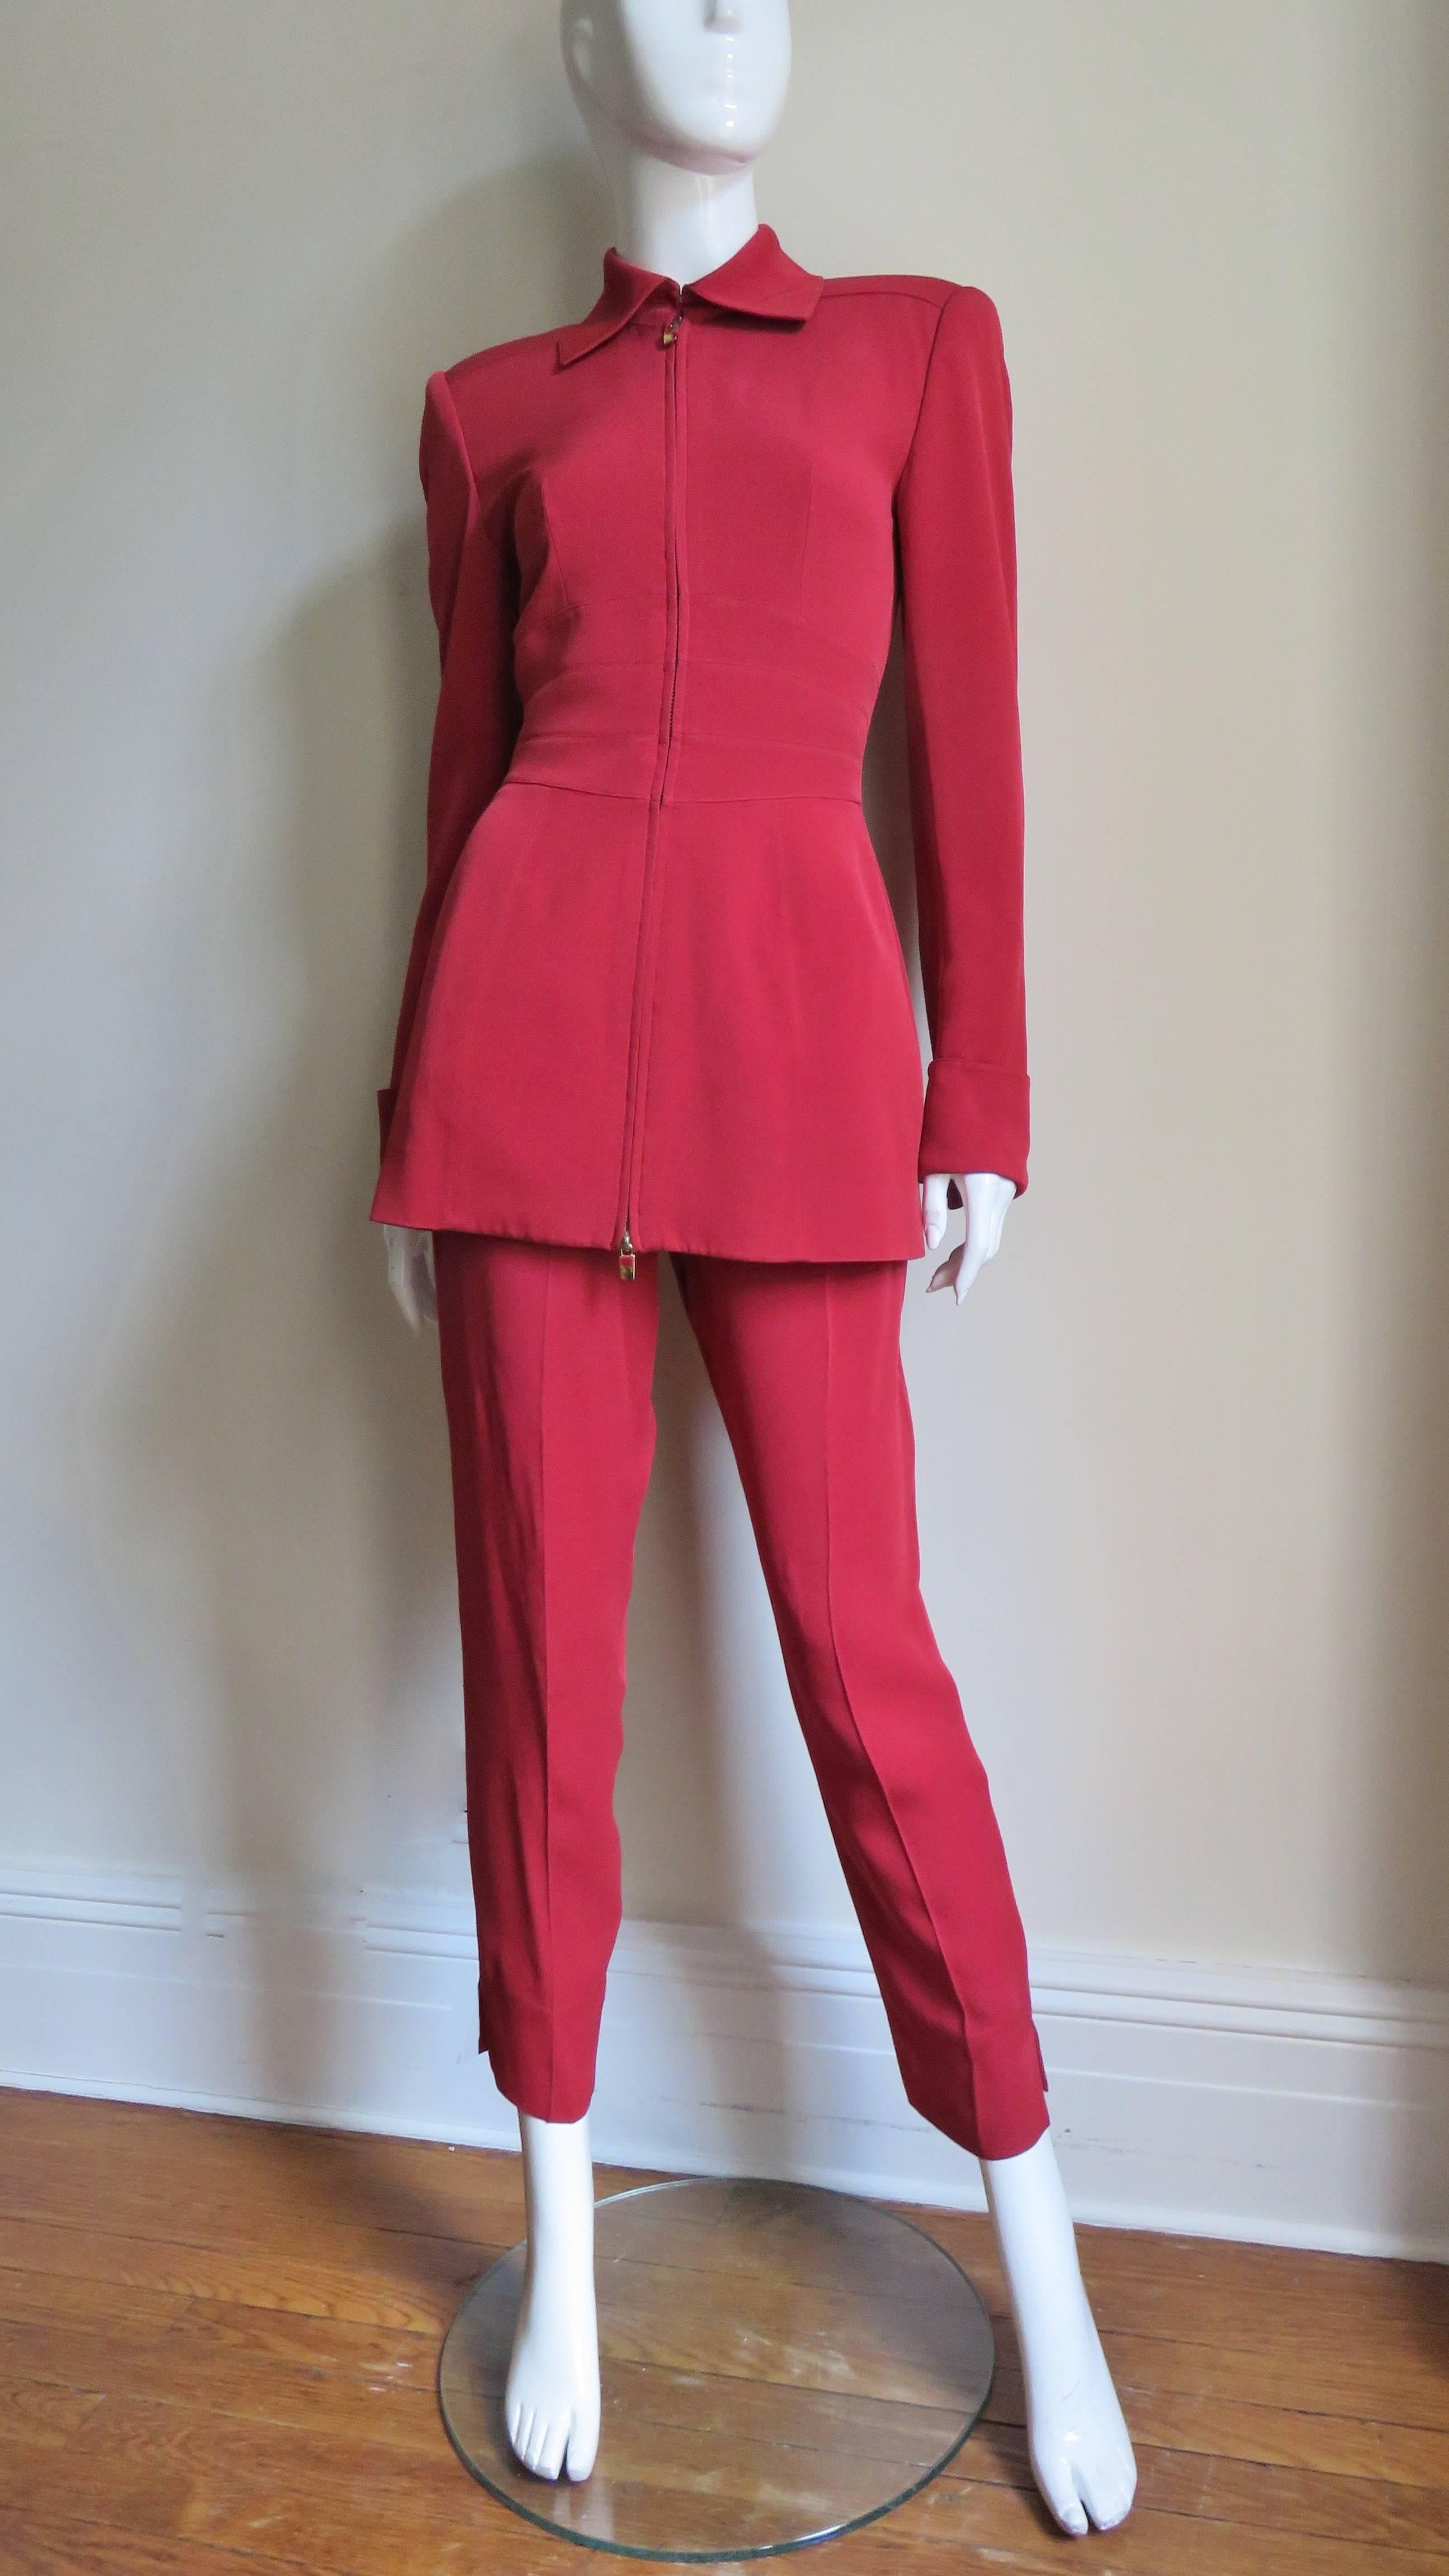 A fabulous red pant suit by  the late, great Claude Montana. The jacket has a pointed collar, shoulder padding, a back yoke, seaming around the waist and long sleeves with zipper cuffs.   It closes up the front with a zipper with matching red metal